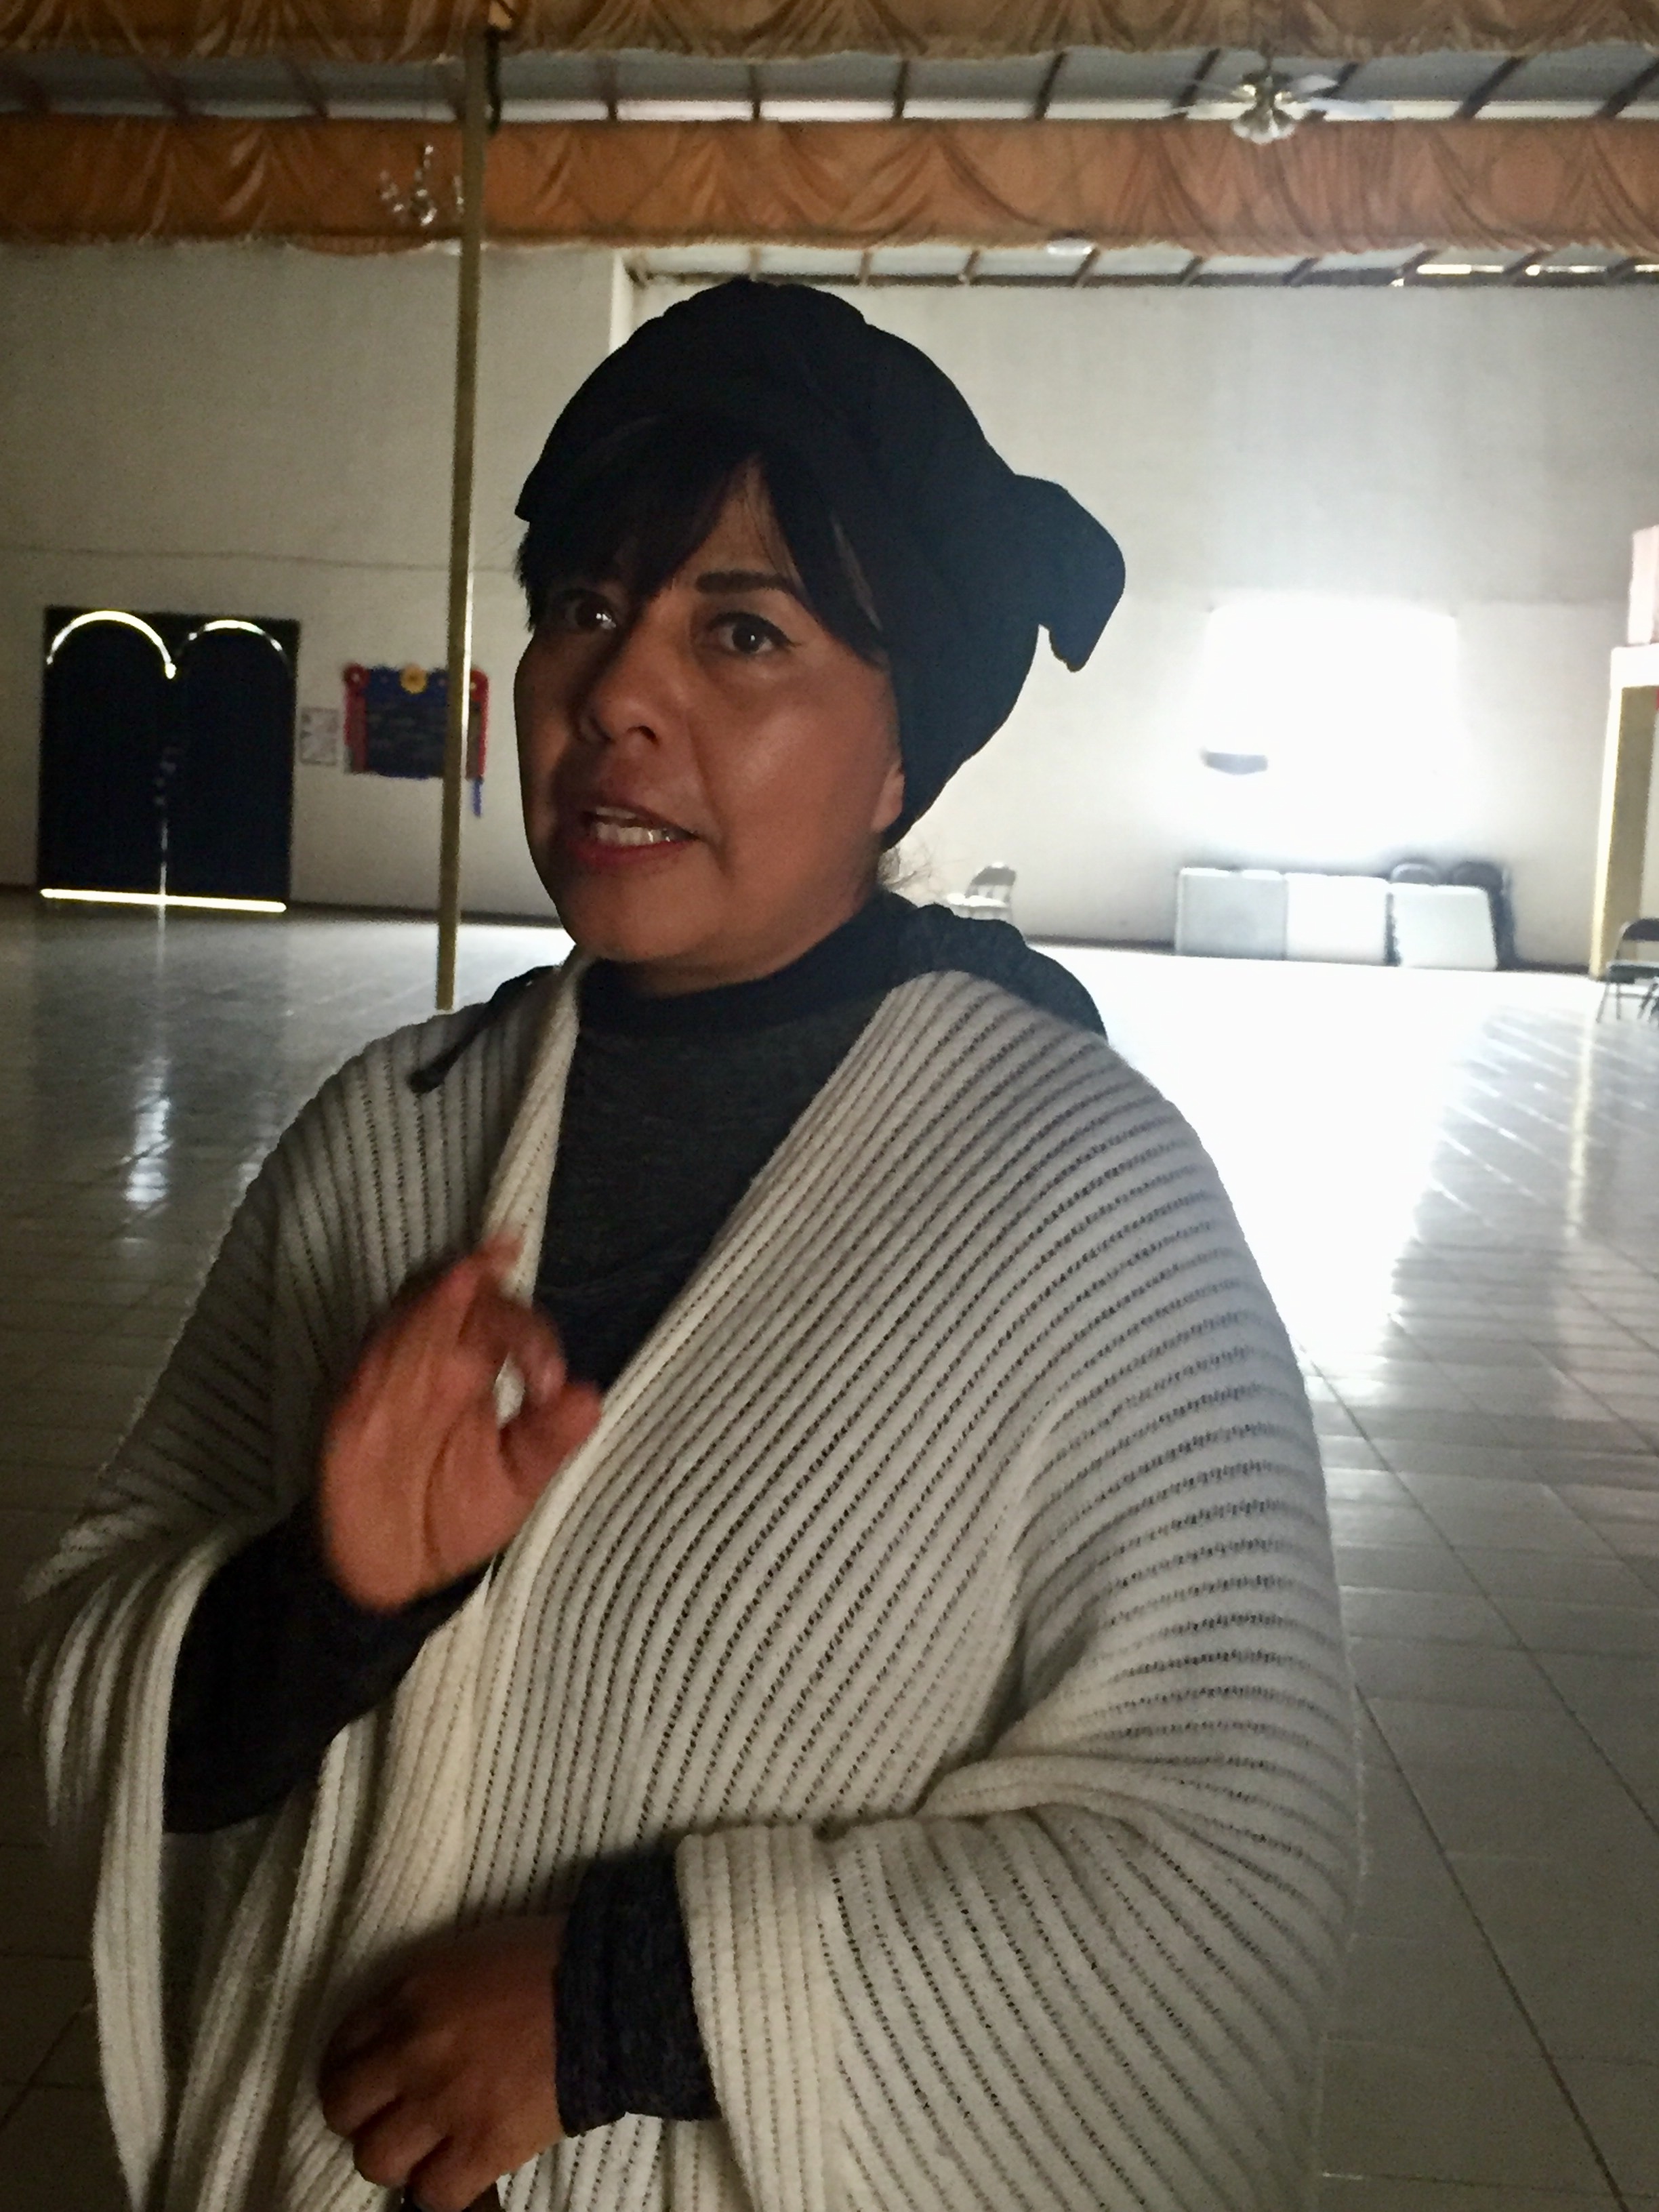 Pastor Zaida, Ambassadors of Christ Church, talks about her ministry with asylum seekers